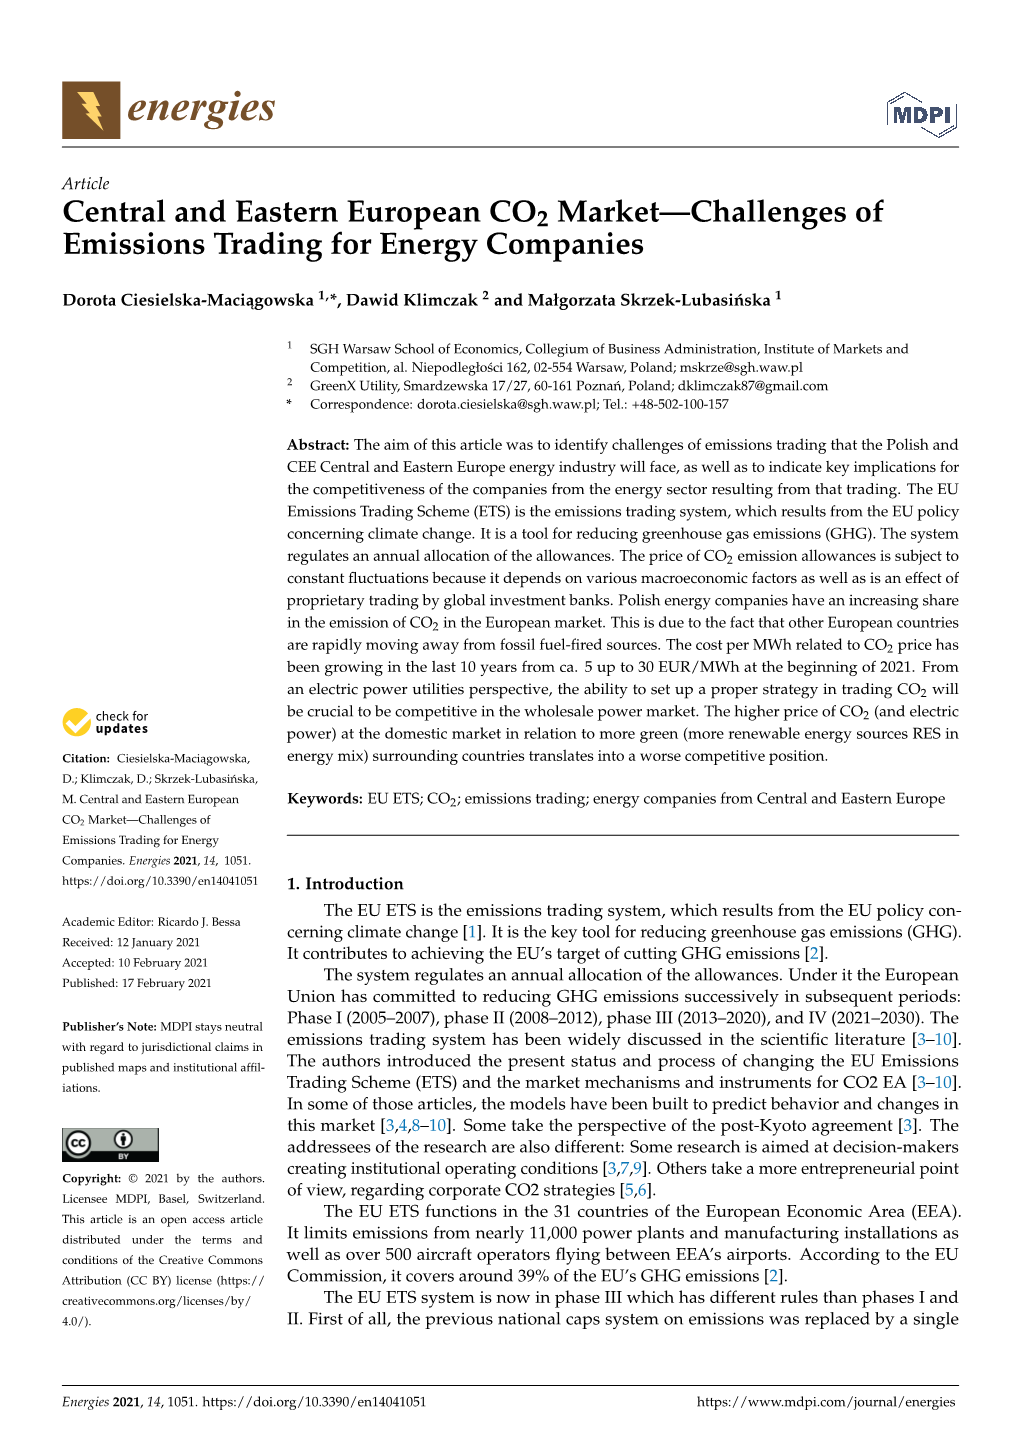 Central and Eastern European CO2 Market—Challenges of Emissions Trading for Energy Companies